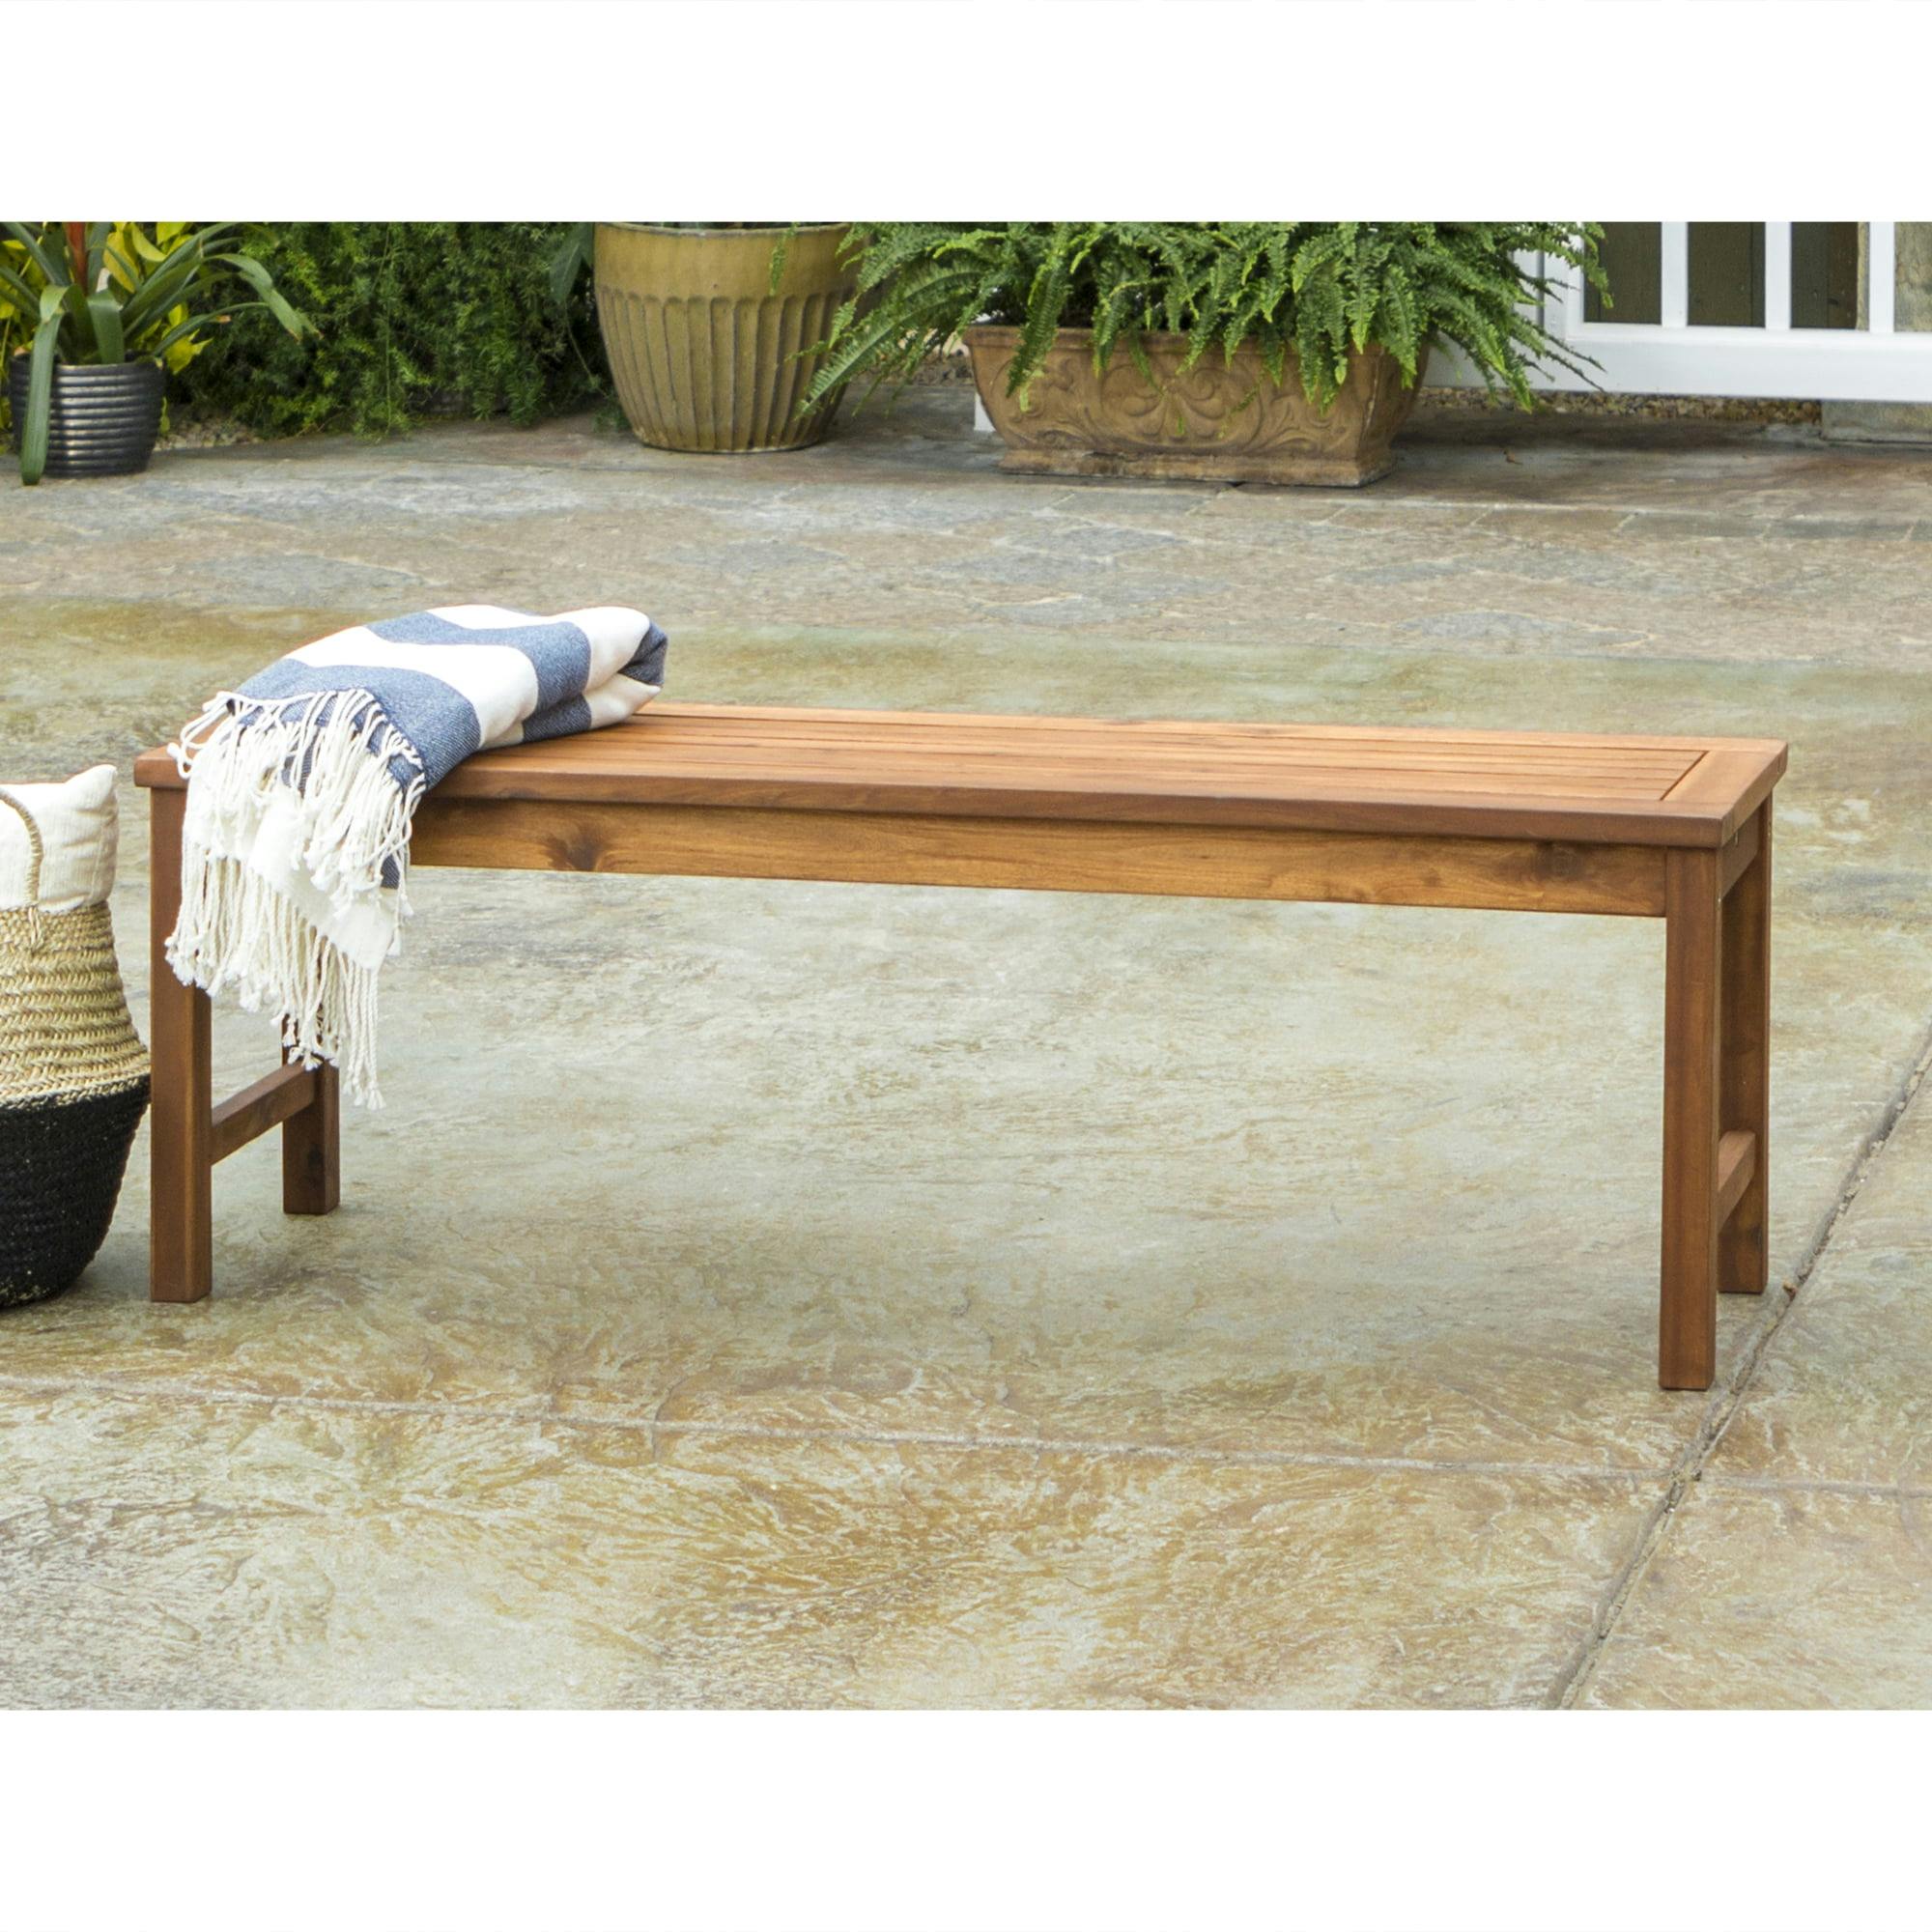 Solid Acacia Wood Outdoor Bench in Natural Brown Finish